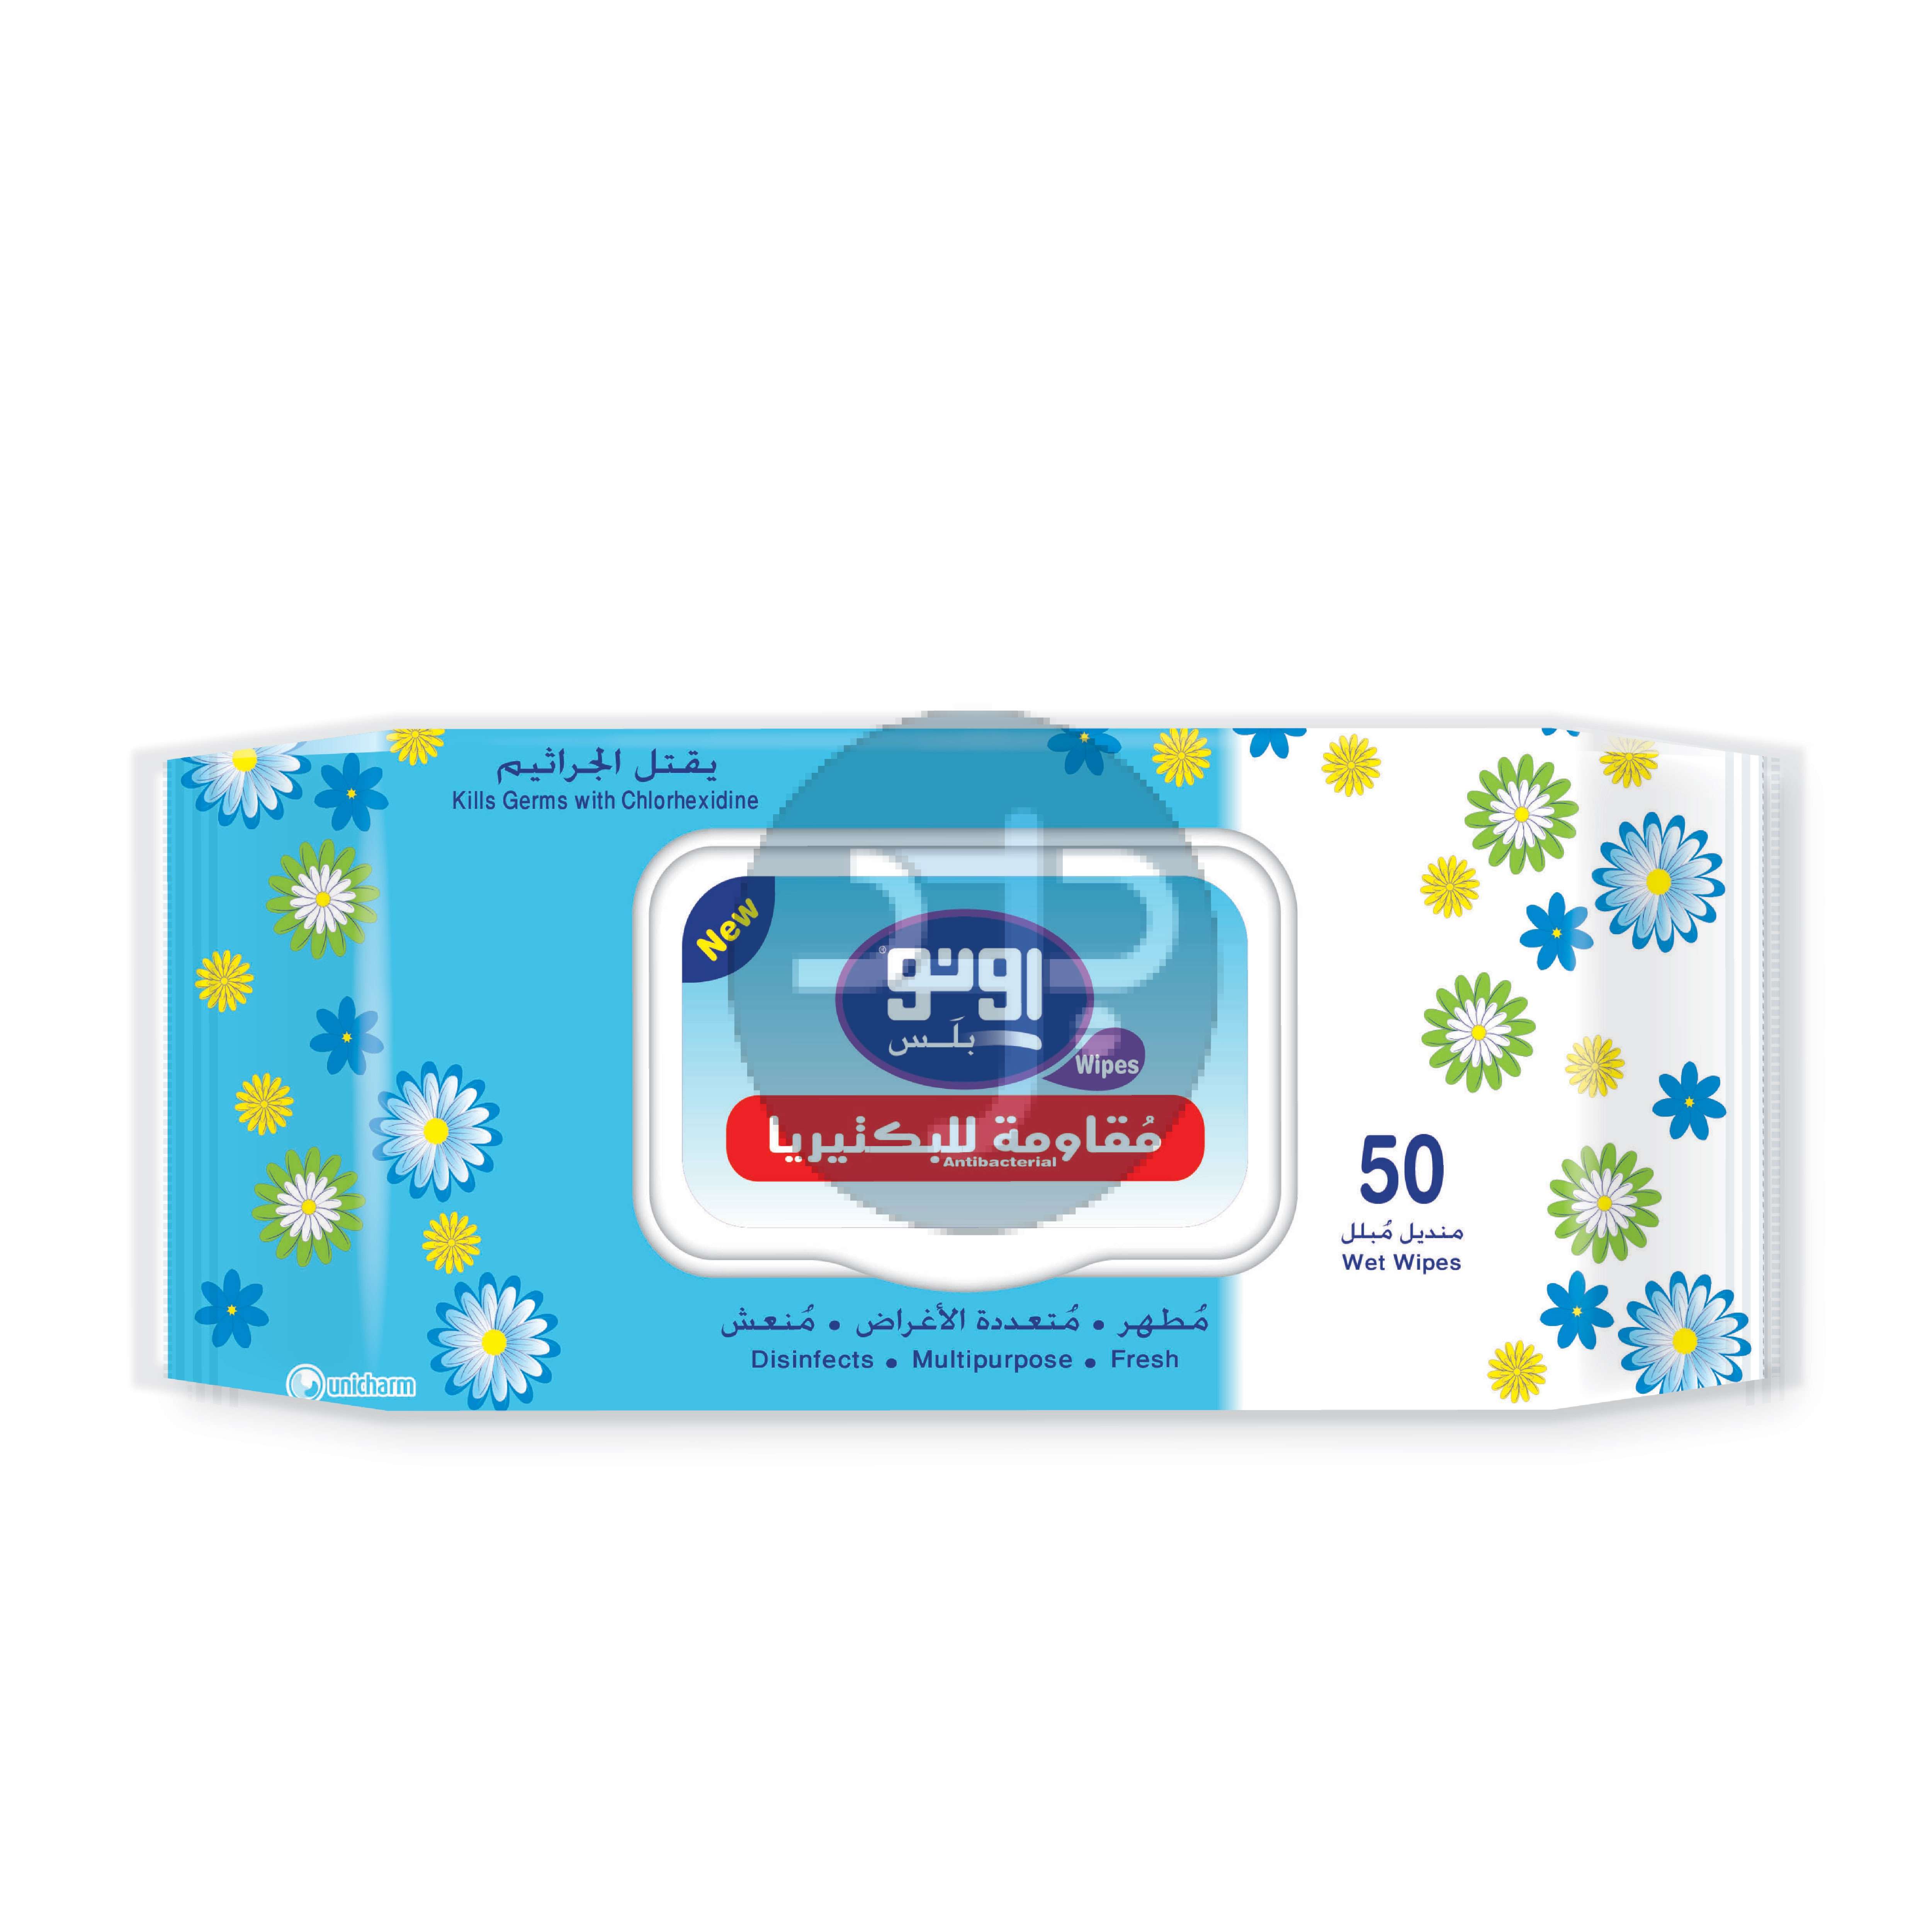 Product-UNO Plus Anti-Bacterial All Purpose Wet Wipes, Pack of 50 Wipes